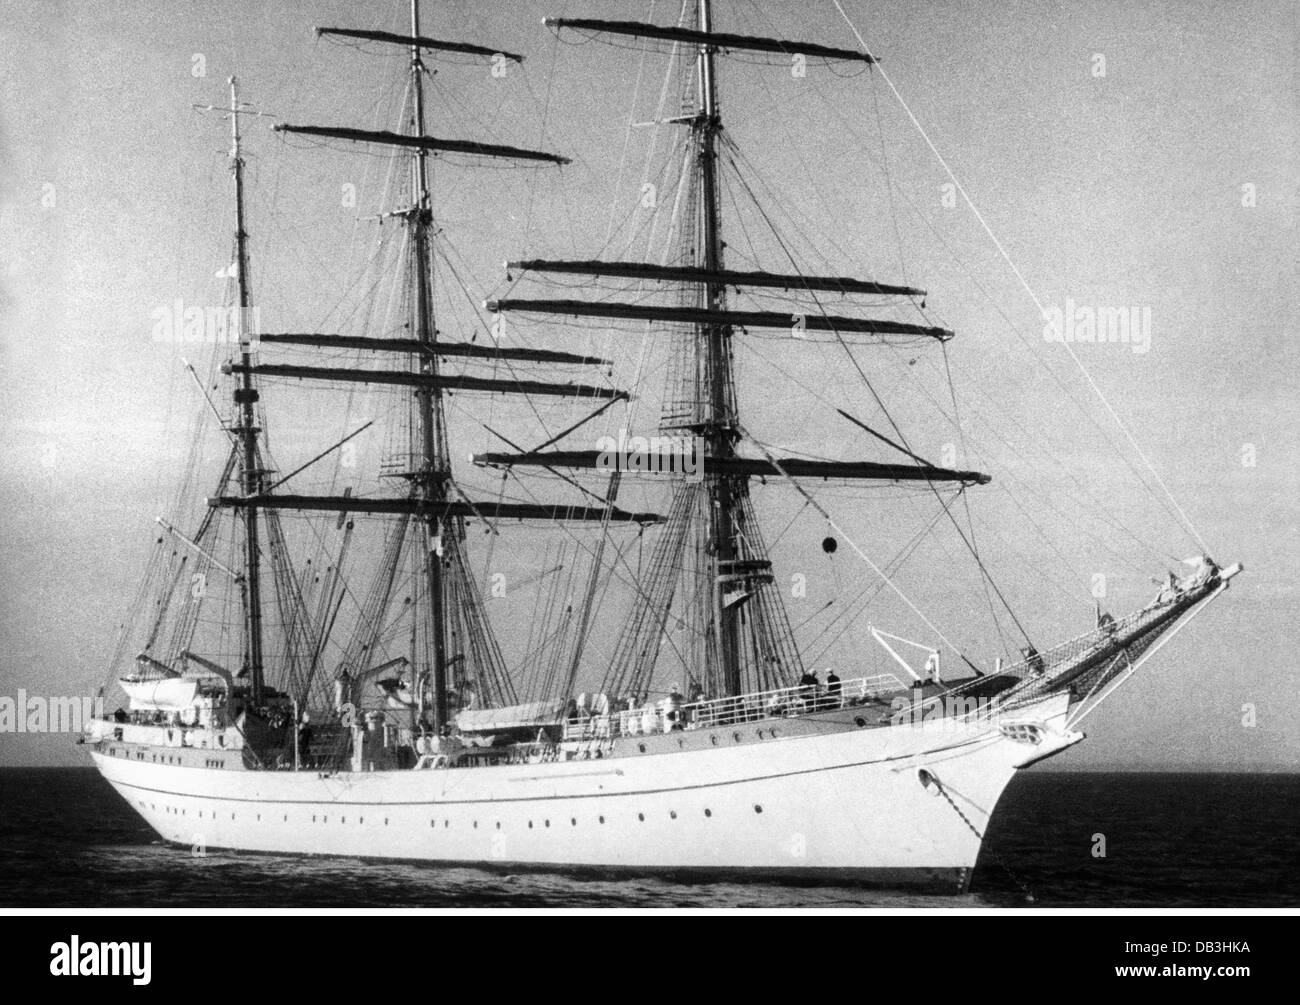 military, Germany, Bundeswehr, Navy, sailing school ship 'Gorch Fock', built by Blohm und Voss, Hamburg, commissioned 1958, view, port, New York Harbour, 5.8.1962, Additional-Rights-Clearences-Not Available Stock Photo